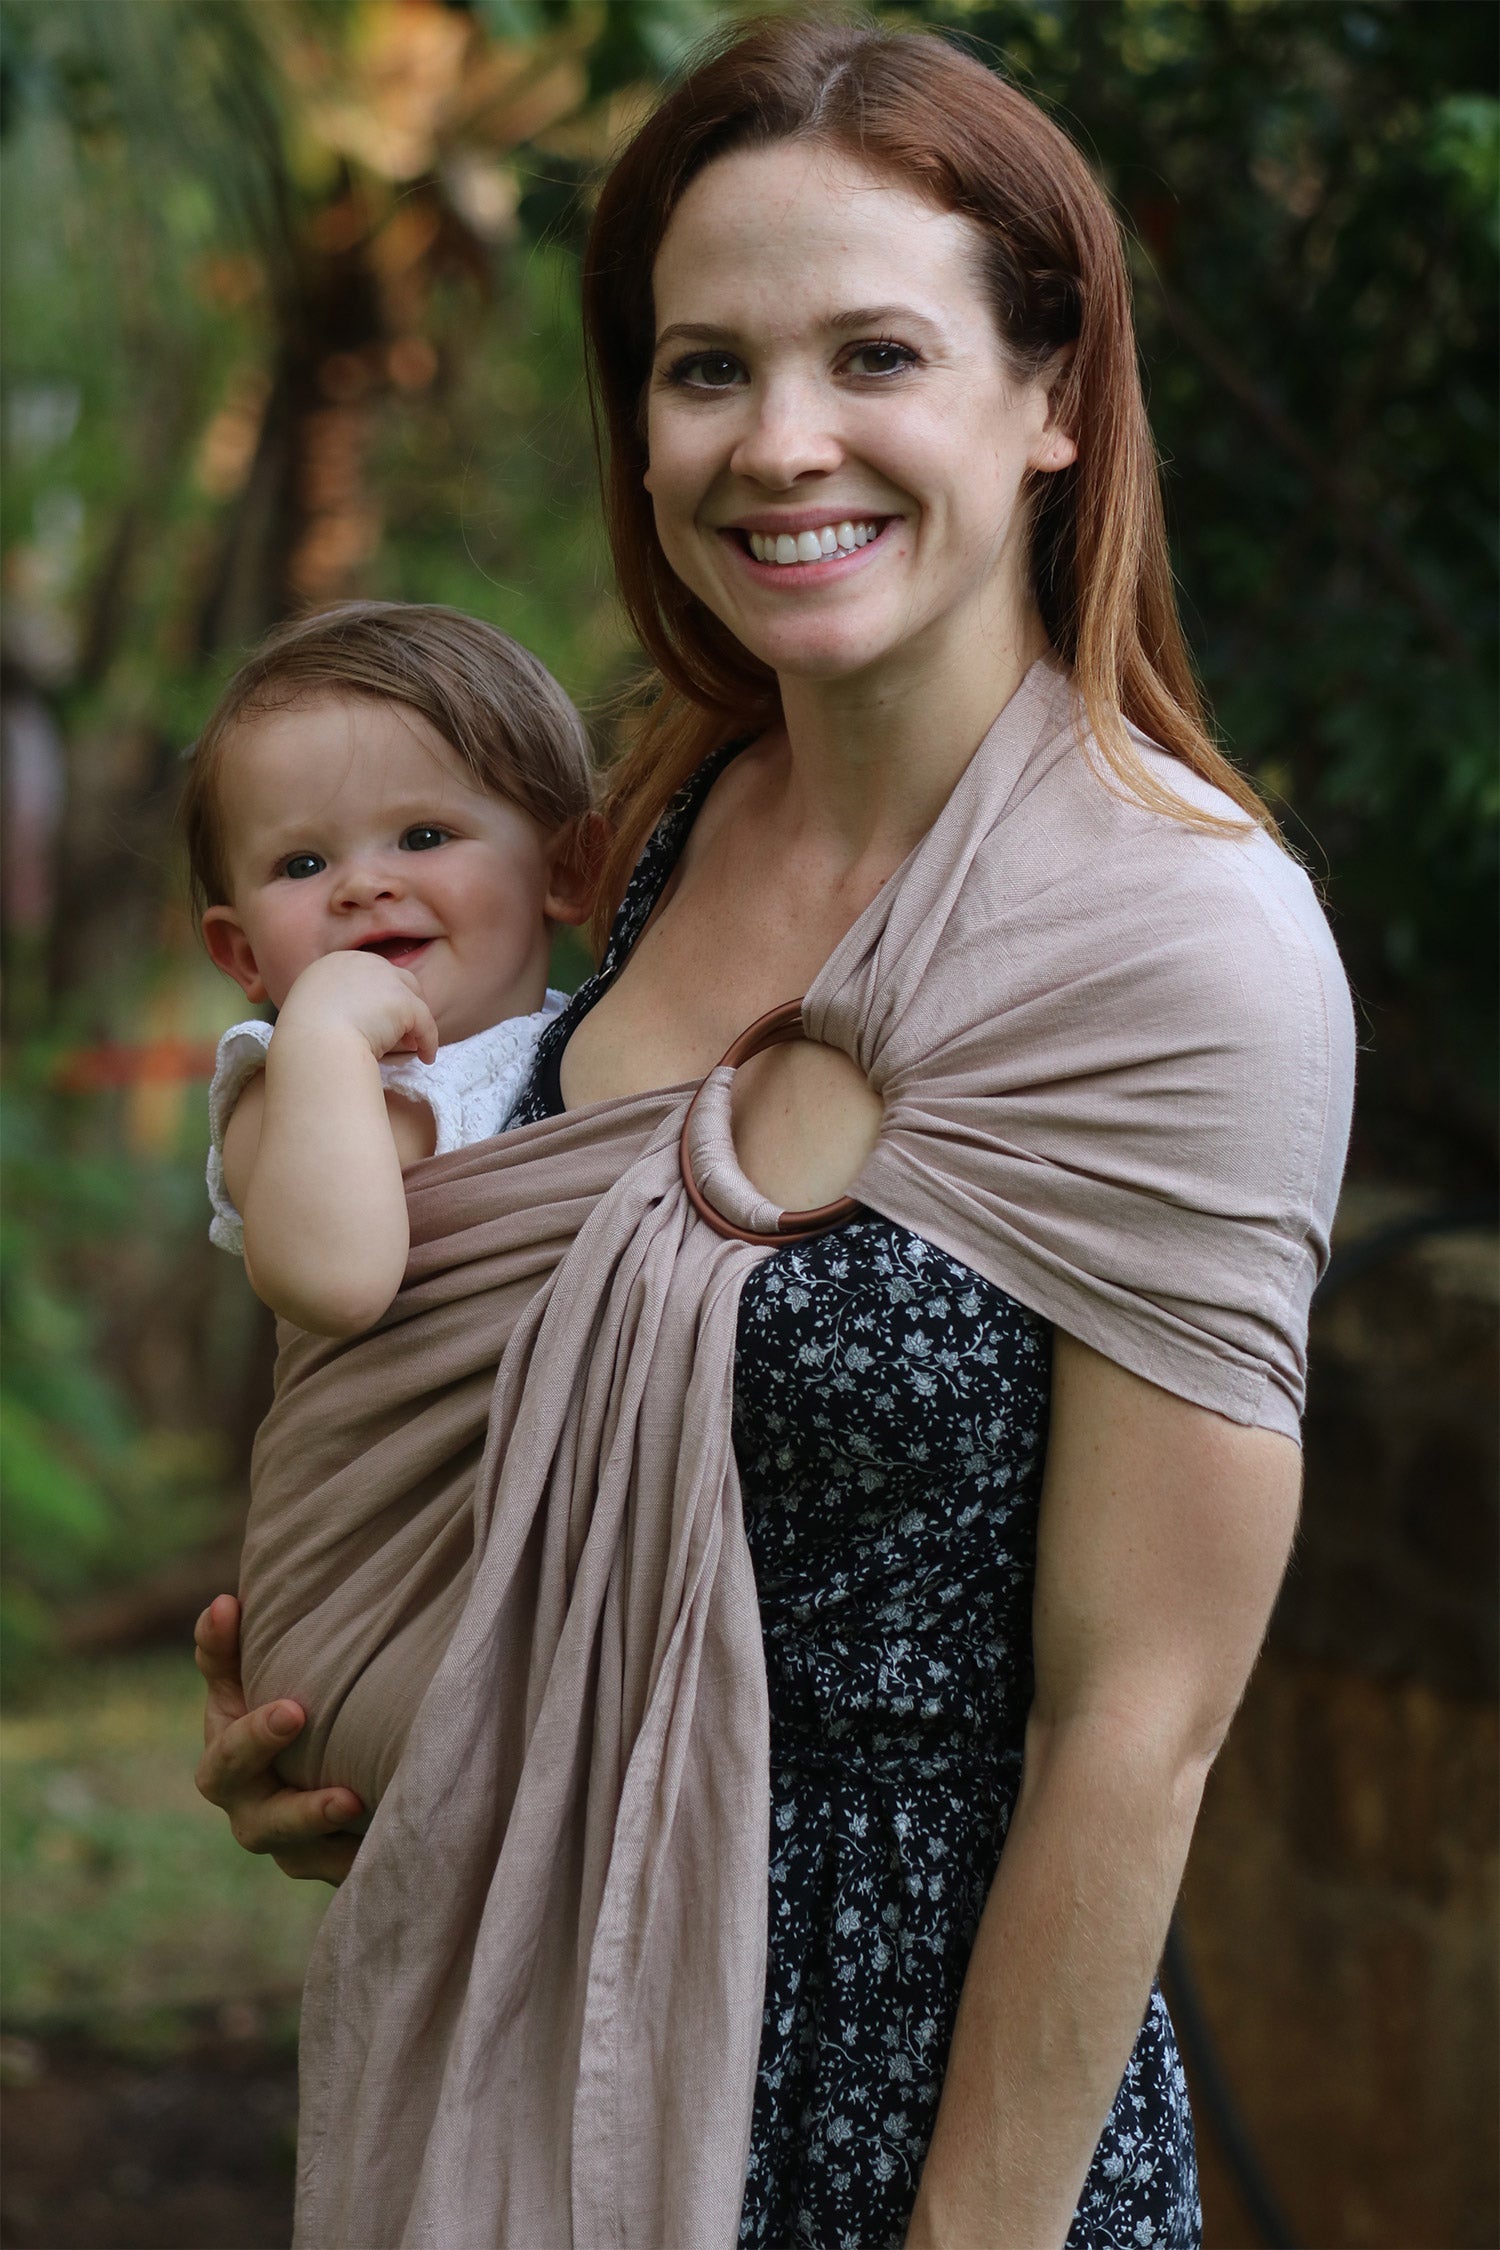 Buy Baby Carrier Sling Wrap Ring,Soft Infant Baby Carriers for